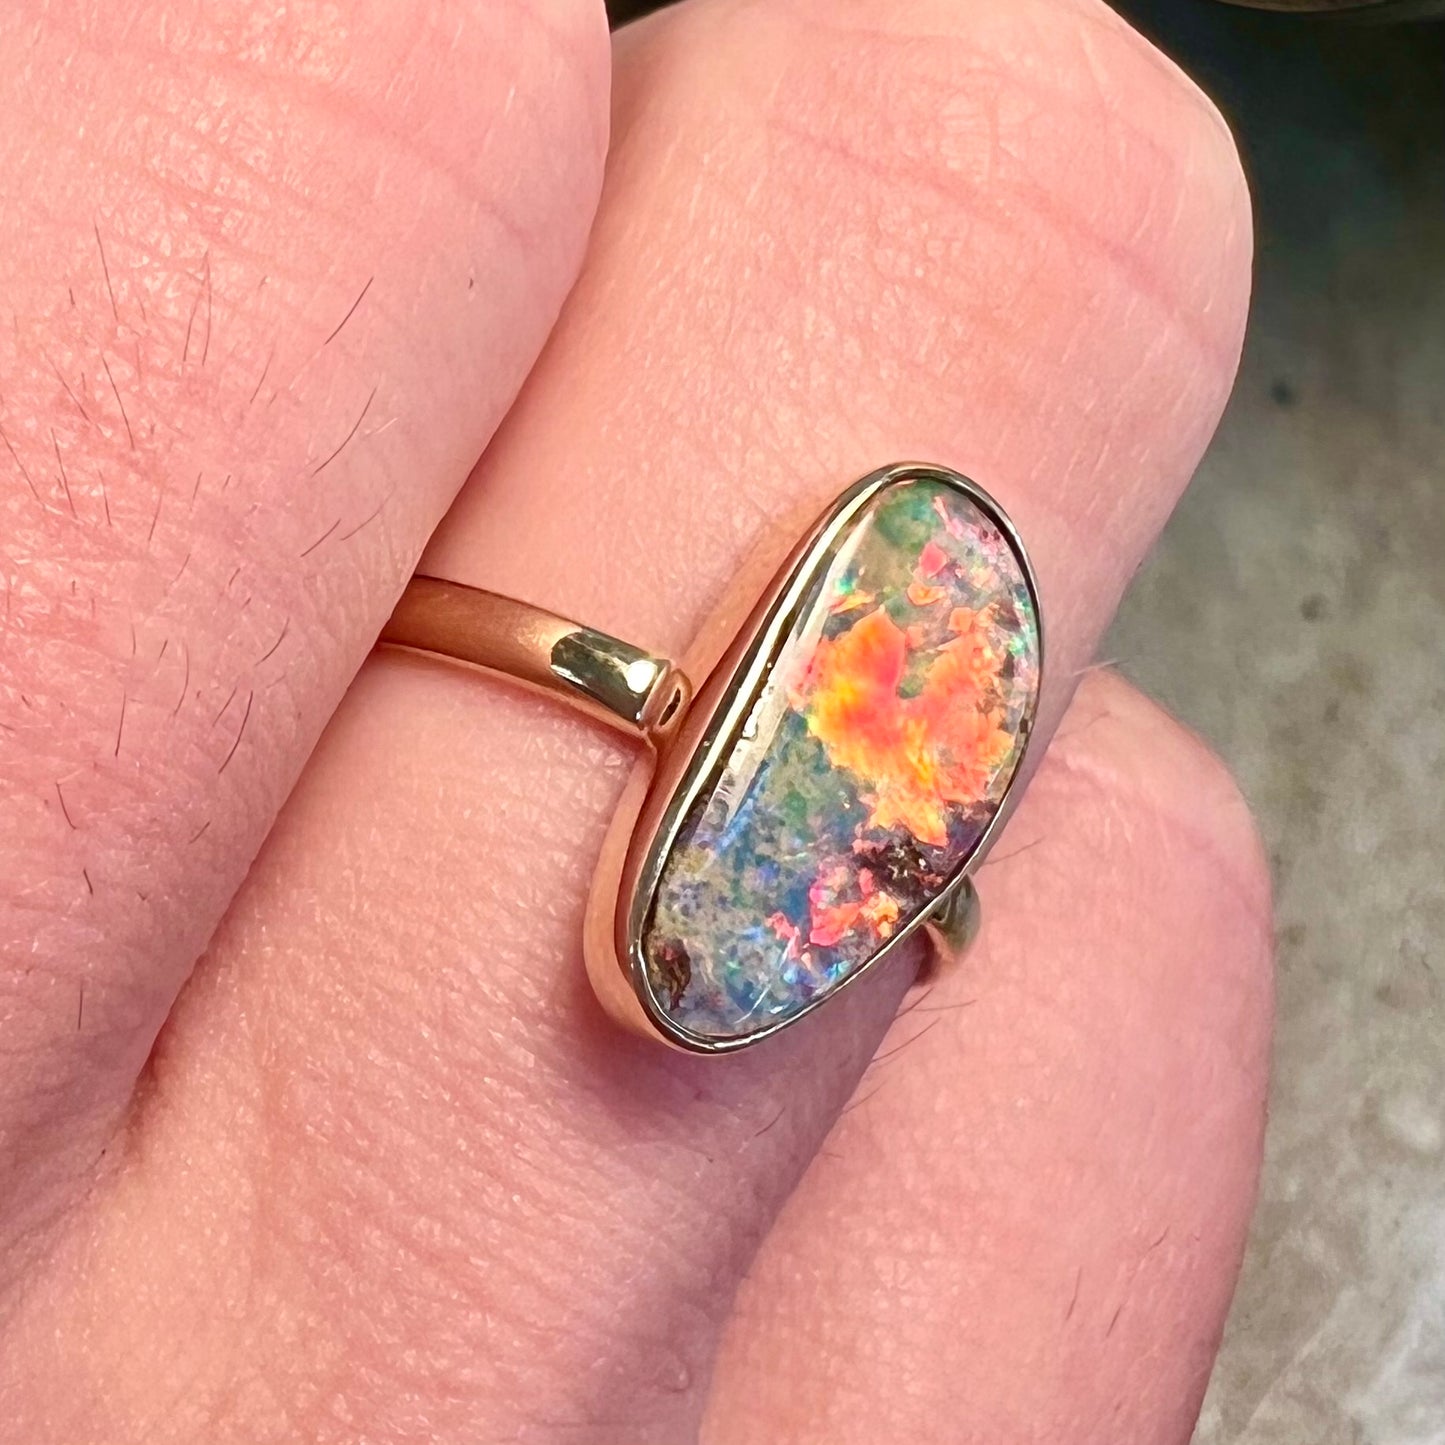 A bright, freeform cabochon cut rainbow boulder opal set in a yellow gold solitaire ring.